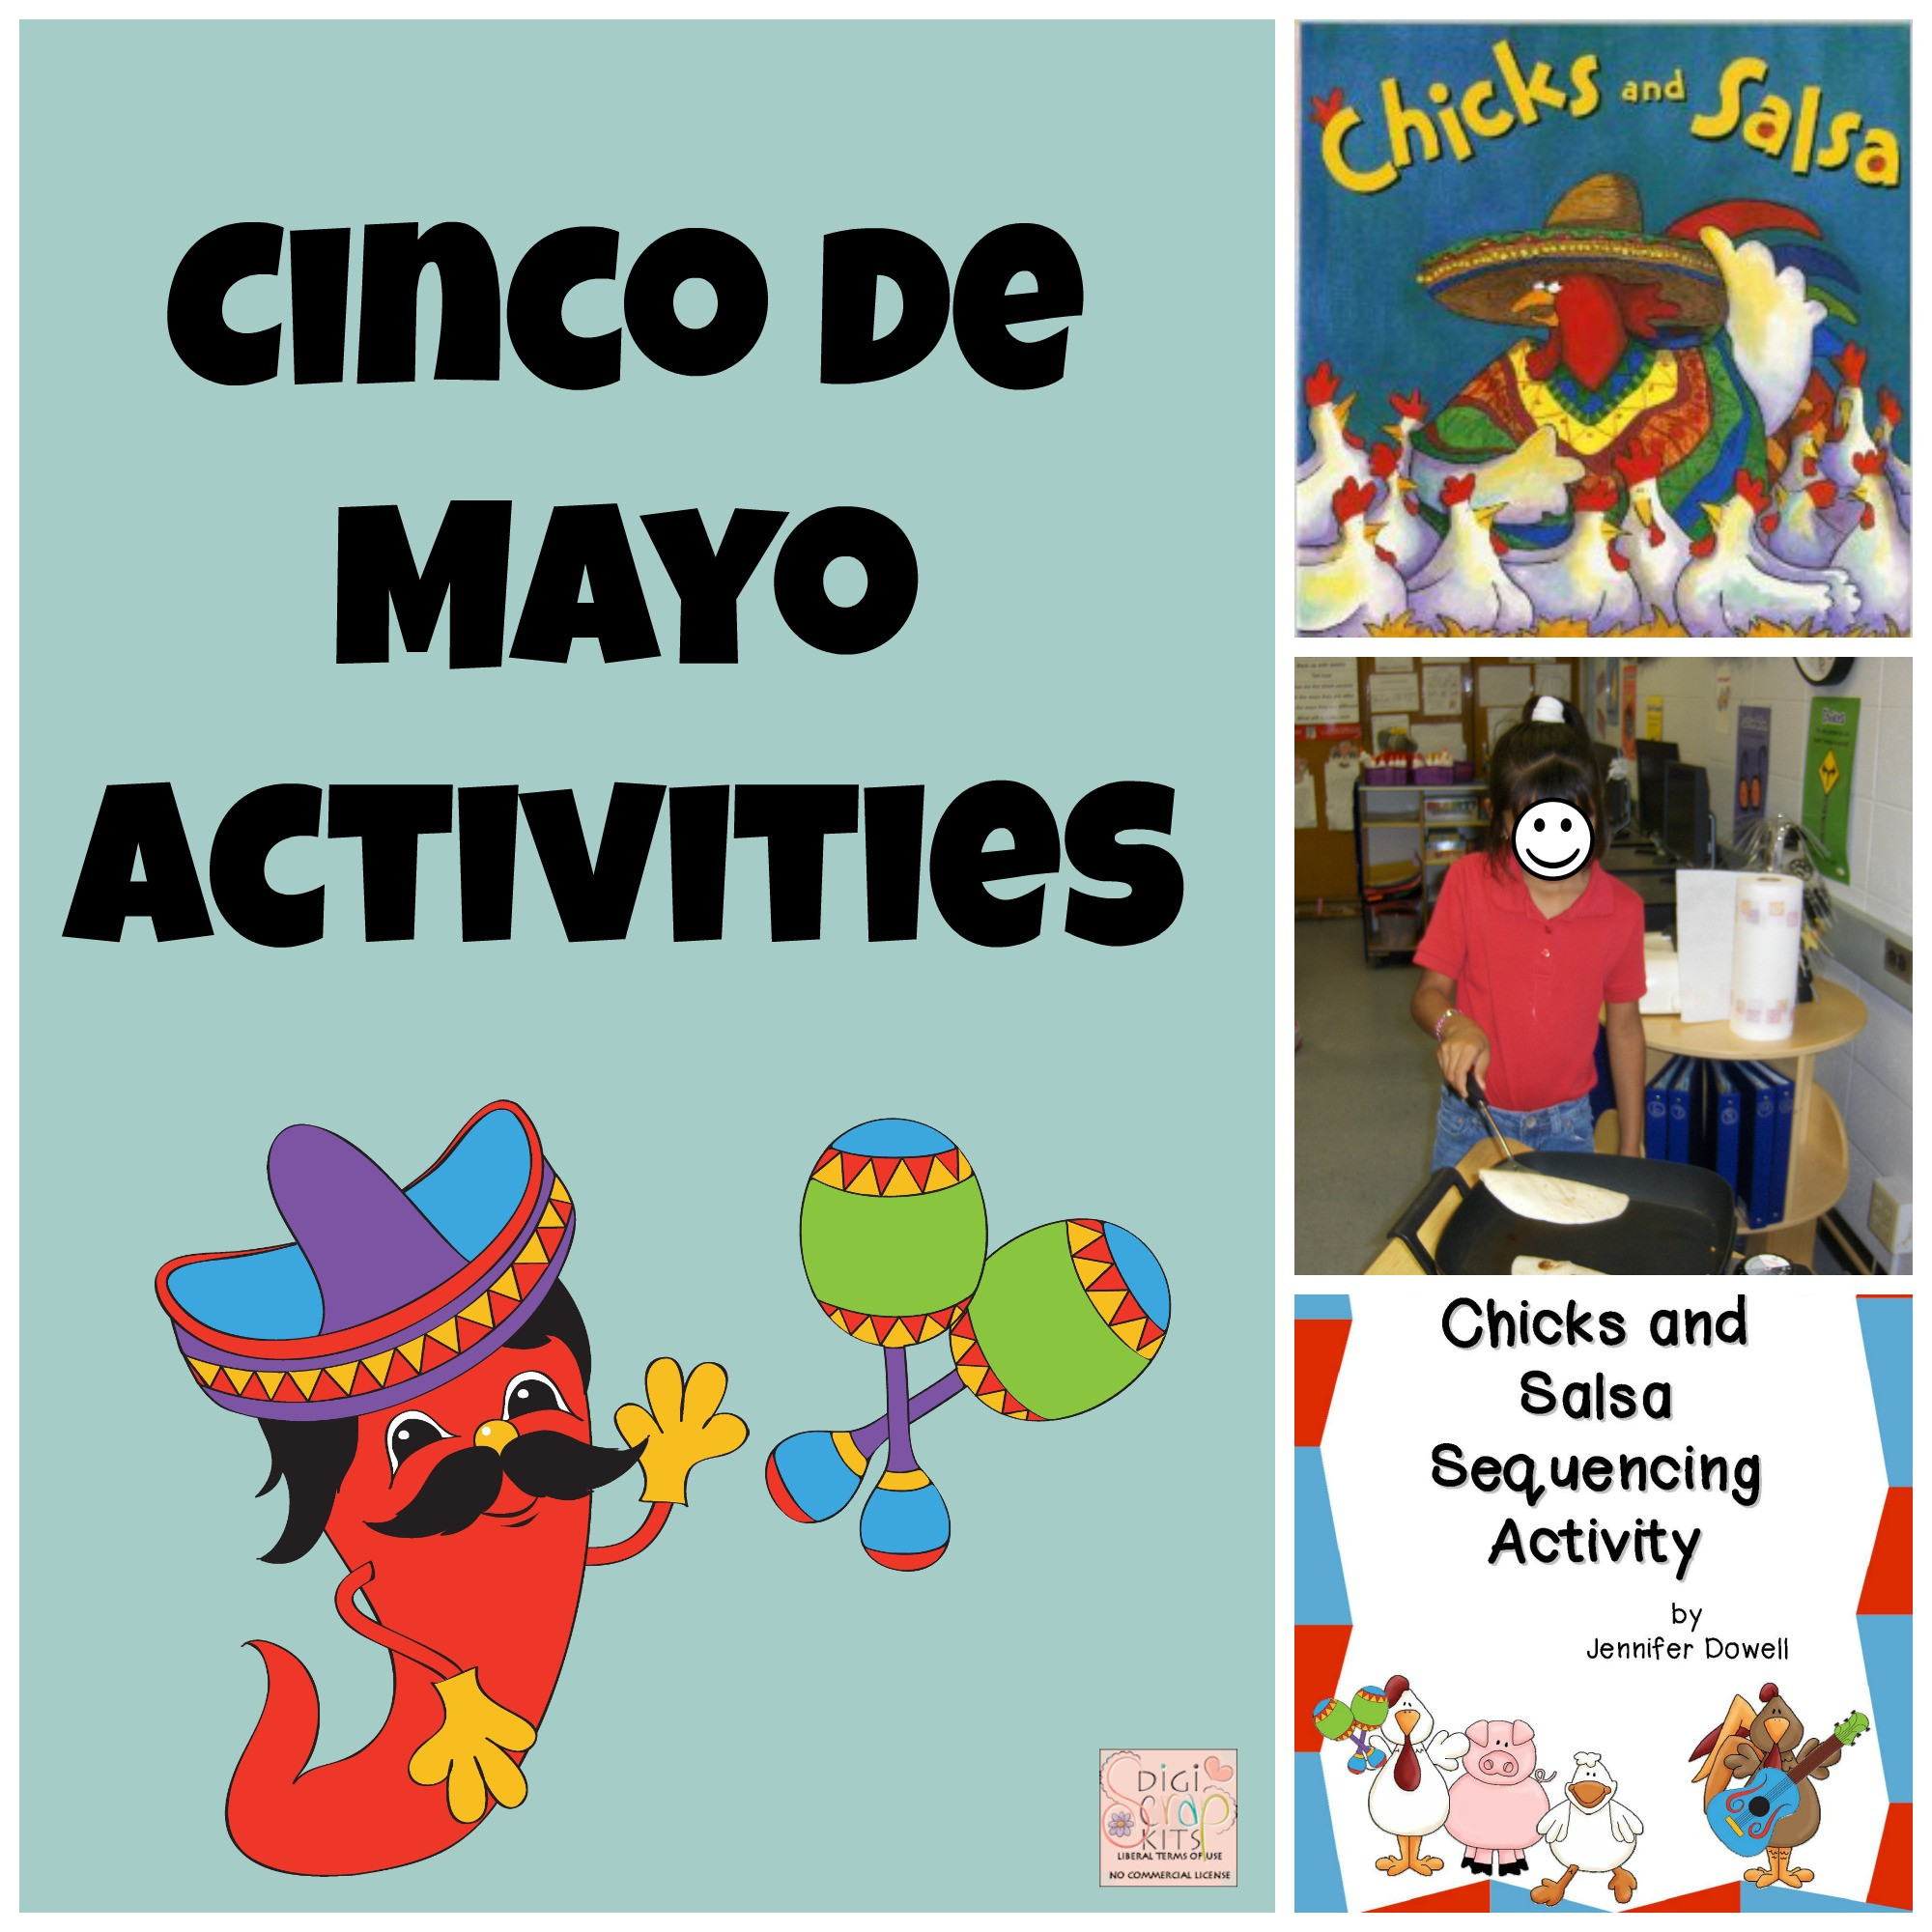 Cinco De Mayo Activities
 Cinco de Mayo Activities Chicks and Salsa sequencing